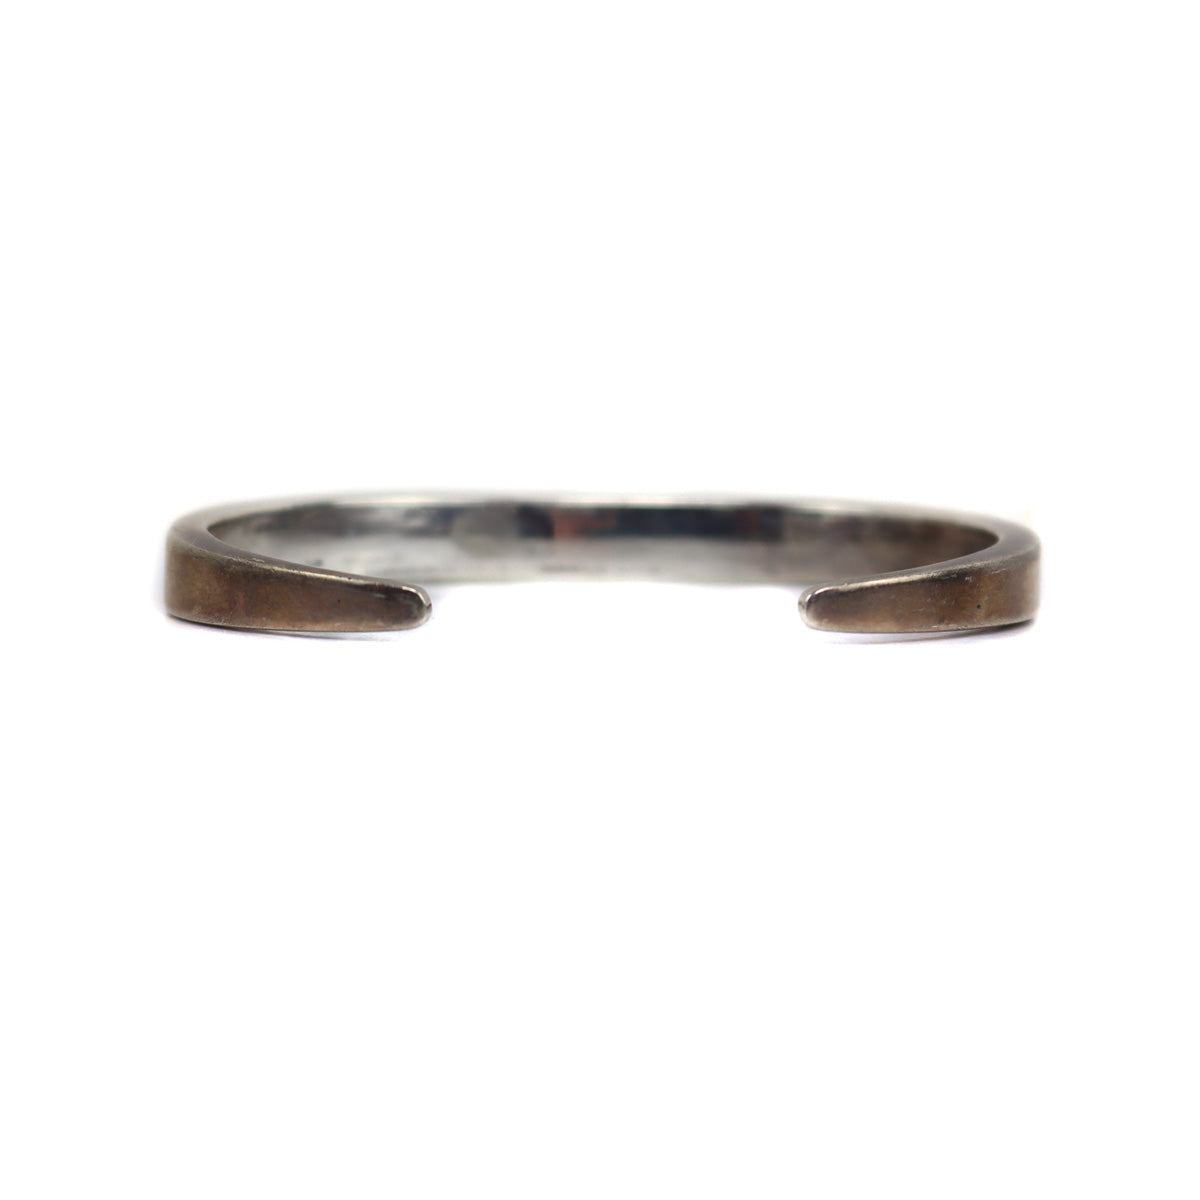 Zuni Ironwood and Silver Channel Inlay Bracelet c. 1950s, size 6.25 (J15552-CO-047)1
